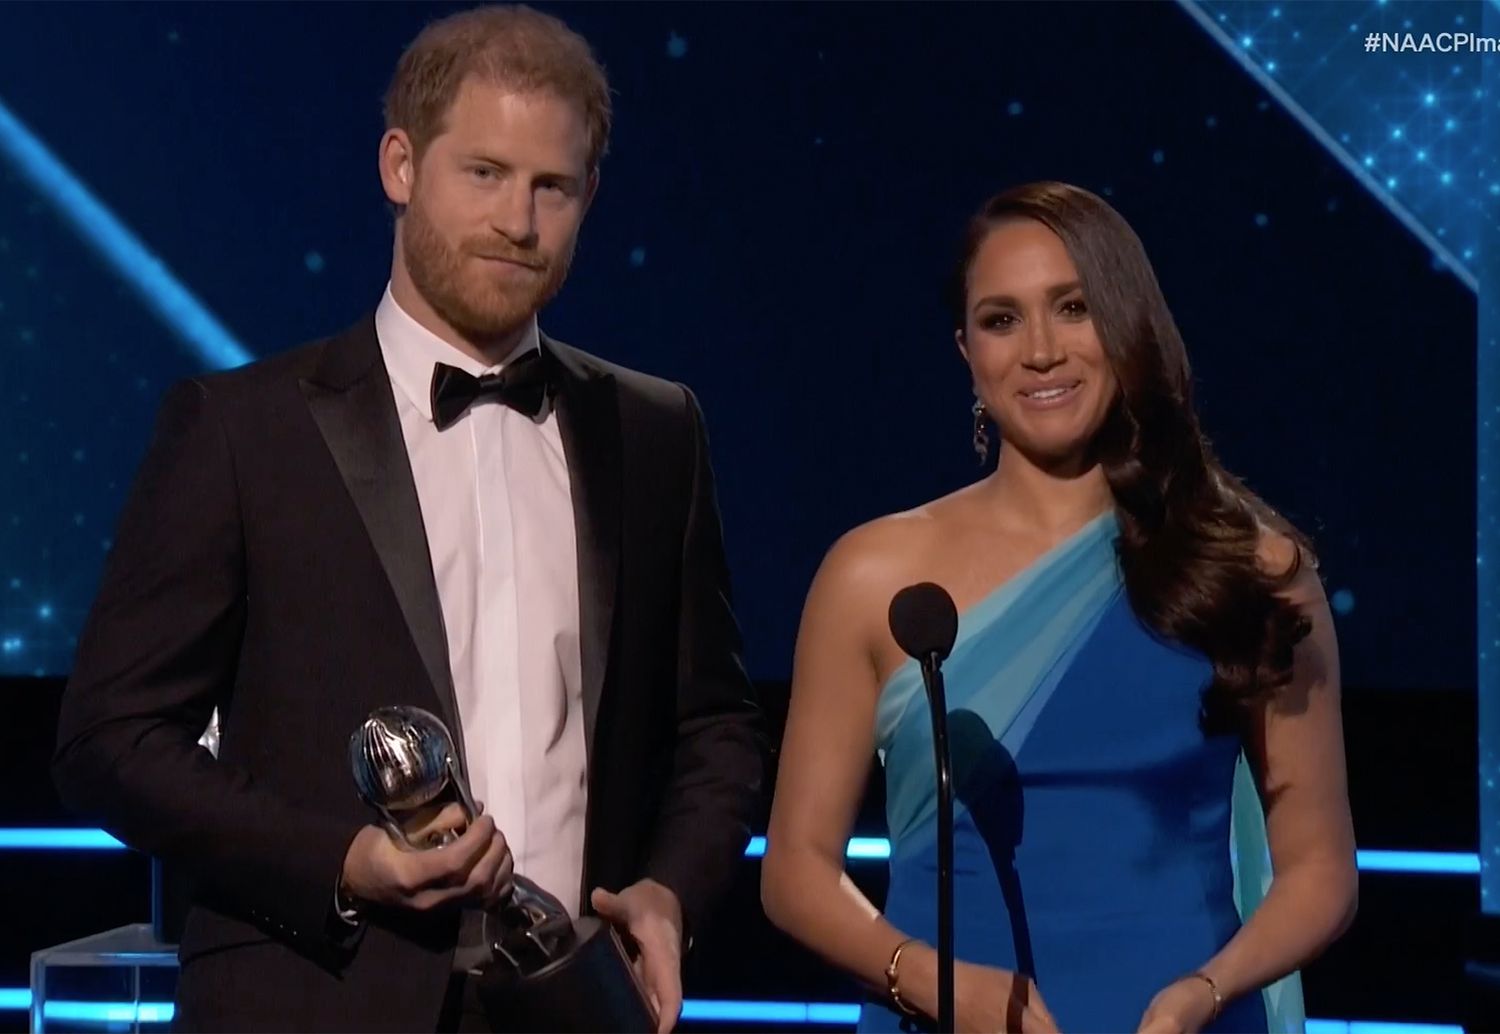 Meghan Markle and Prince Harry Receive Honor at NAACP Image Awards |  PEOPLE.com